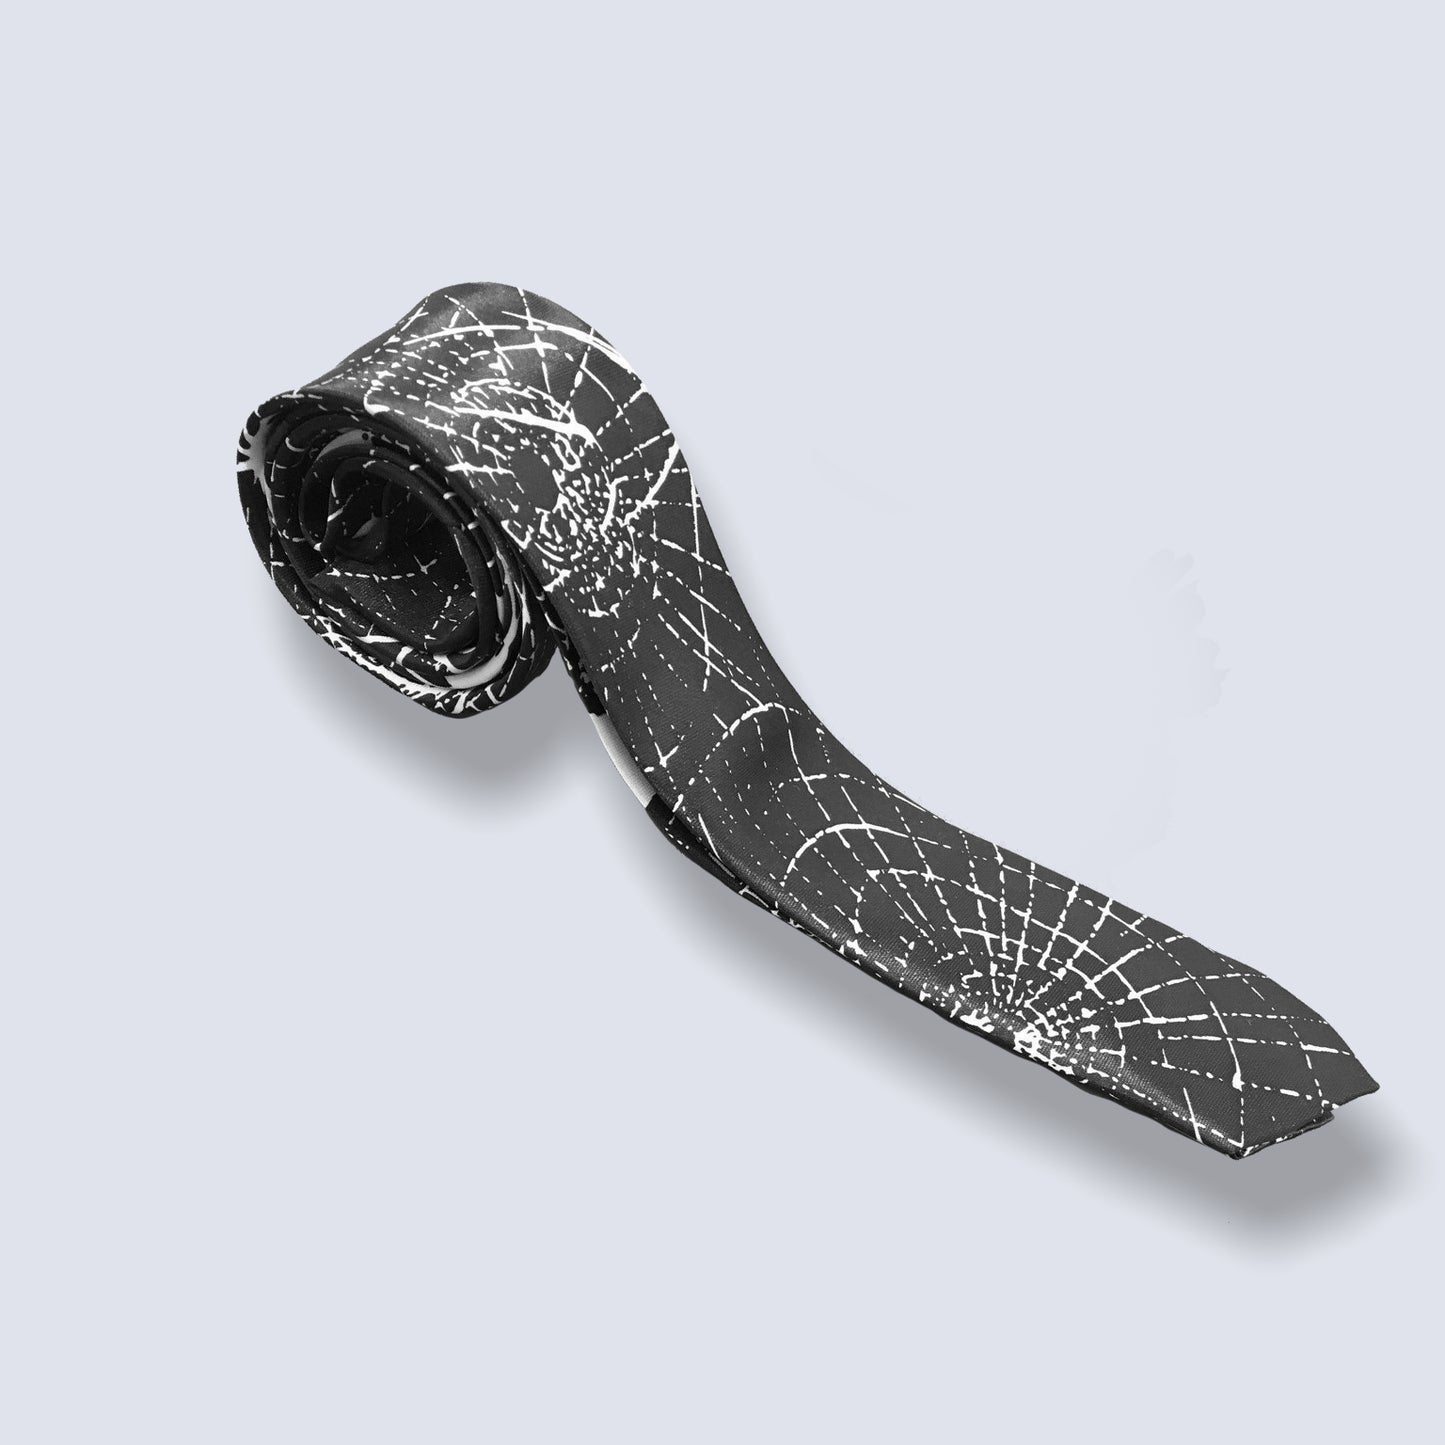 Spider Tie Skinny Halloween Themed Outfit Costume in Black and White